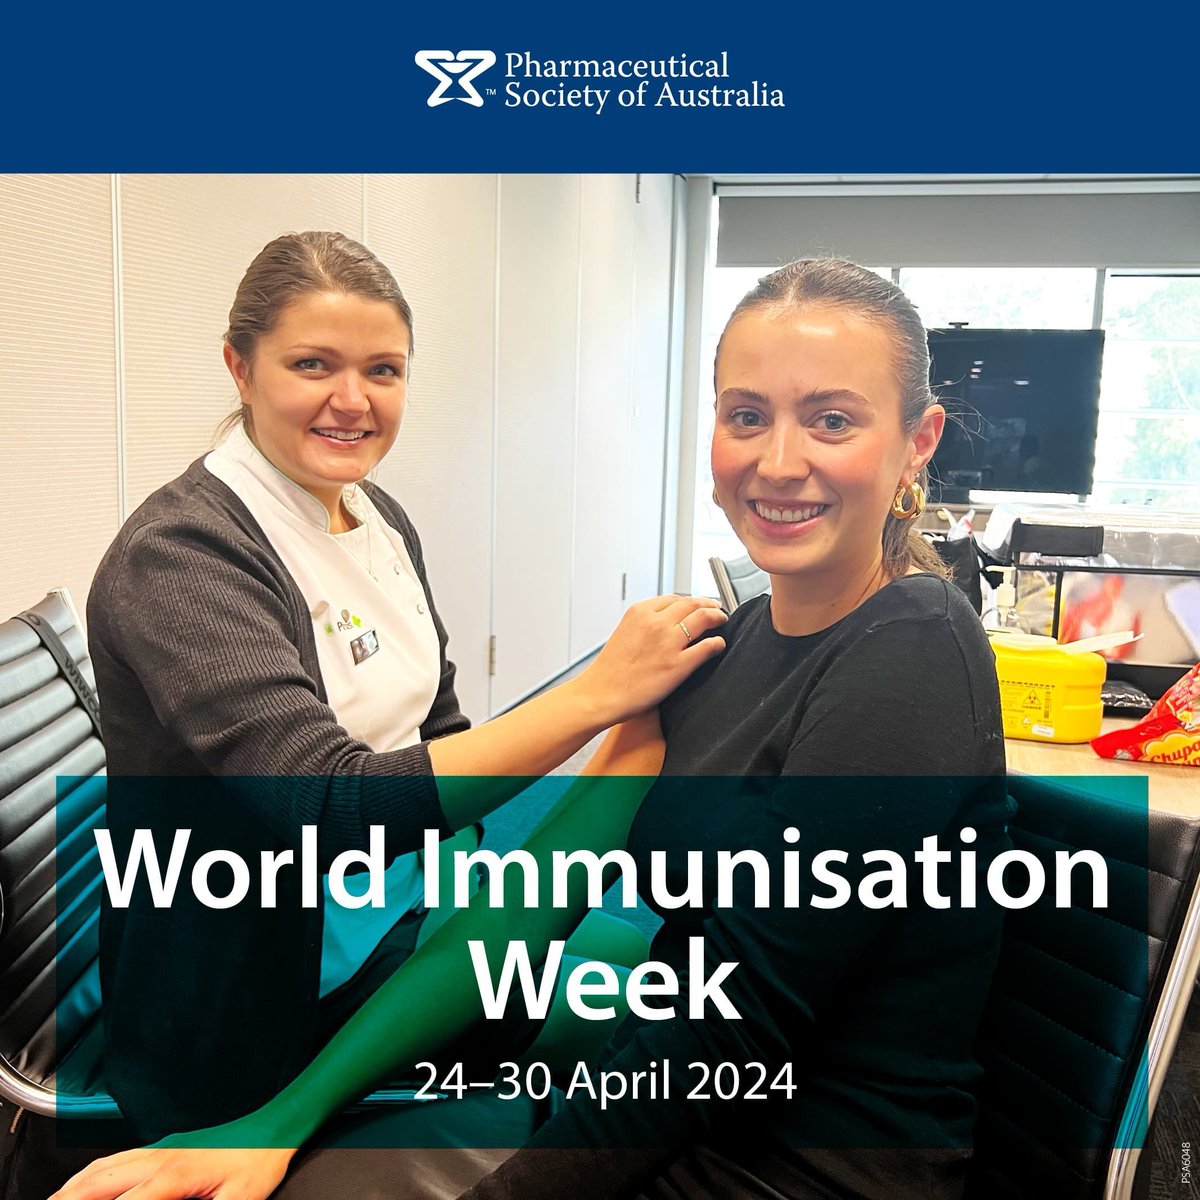 This World Immunisation Week, our dedicated team rolled up their sleeves to receive their flu vaccines at our National Office, administered by the wonderful pharmacists from Cooleman Court Pharmacy. Visit your nearest pharmacy today to get your flu shot. #WorldImmunisationWeek